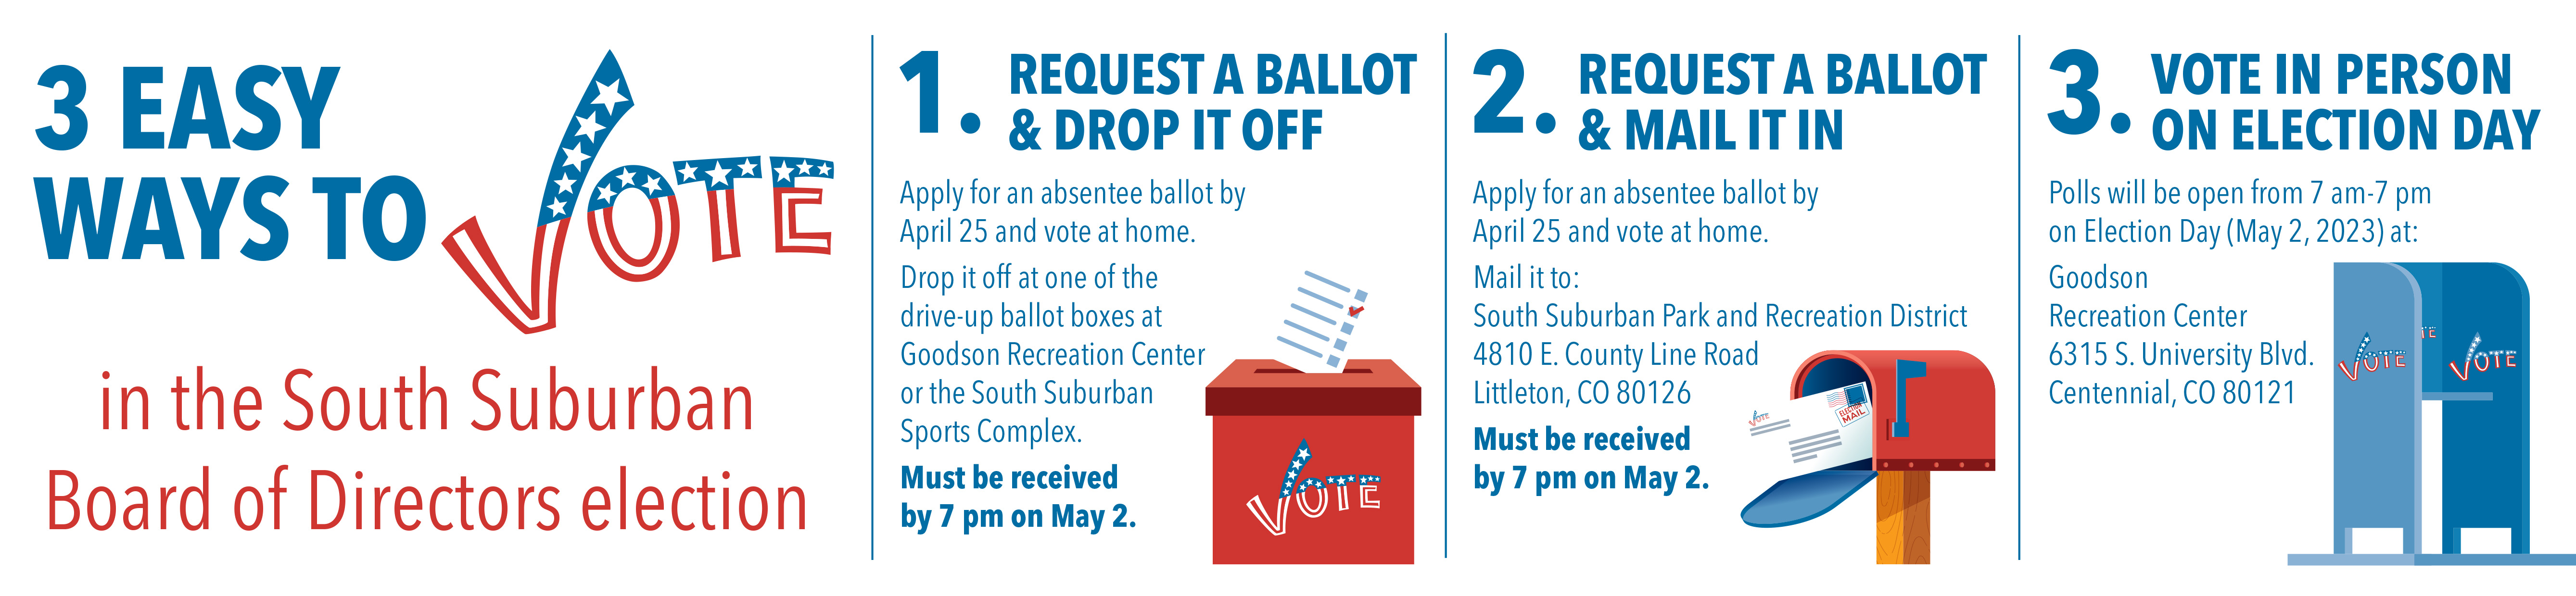 Three Ways to Vote in the South Suburban Board of Directors Election Image. Read below for more info.